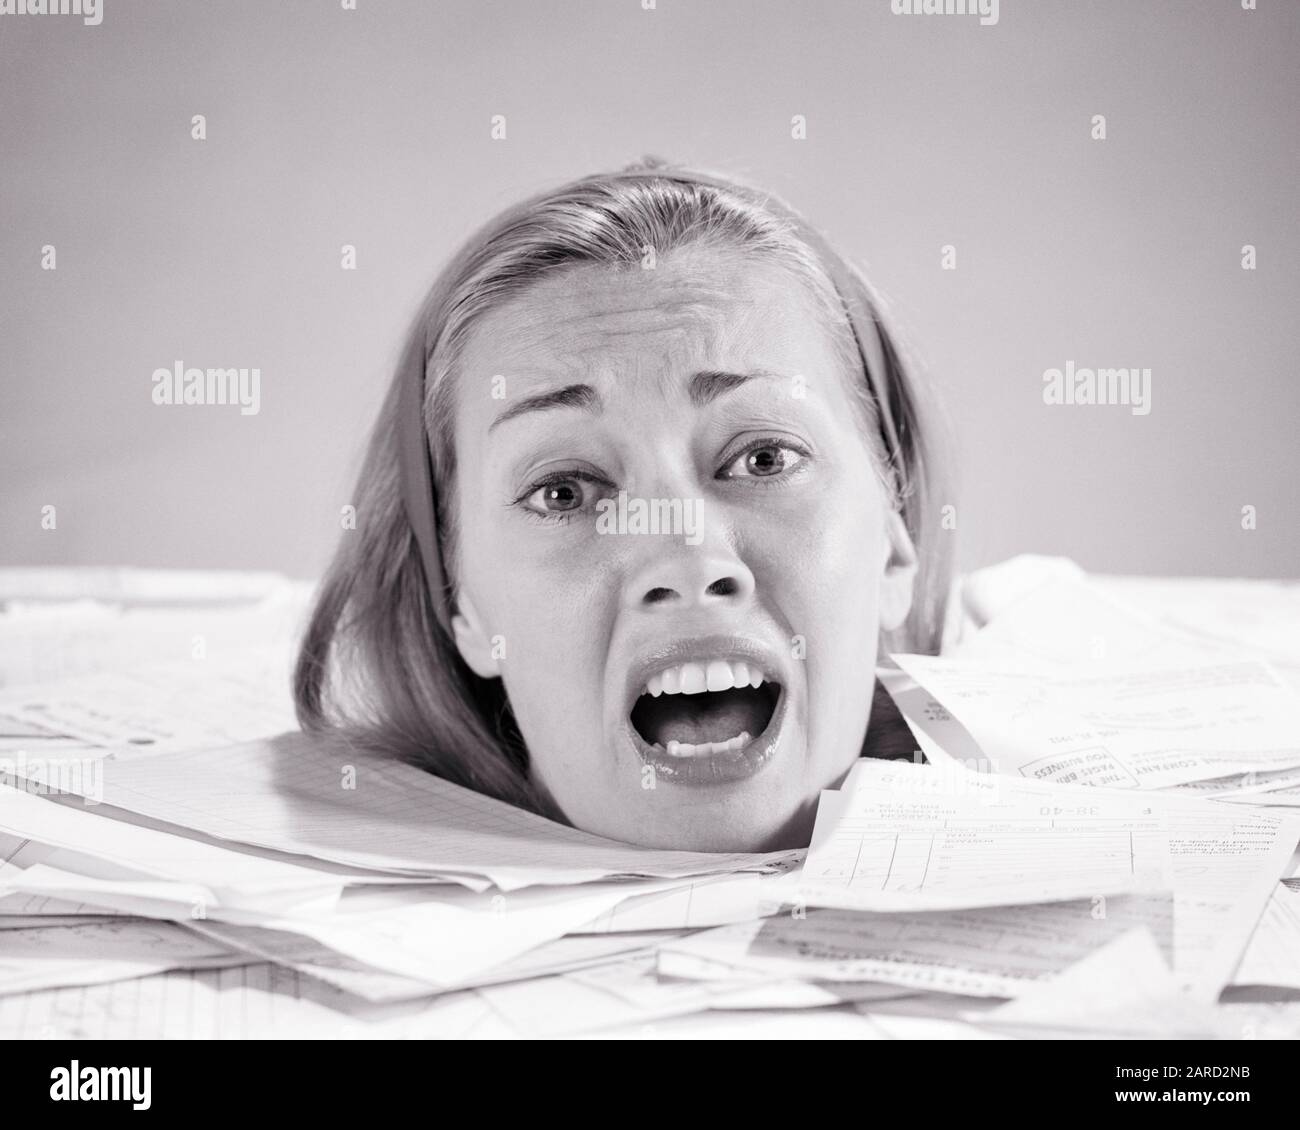 1960s WOMAN UP TO  HER NECK DROWNING IN PAPER BILLS INVOICES SHOUTING FOR HELP LOOKING AT CAMERA - s15445 HAR001 HARS NECK DEBT INFORMATION WORRY PROBLEM LIFESTYLE FEMALES STUDIO SHOT MOODY HOME LIFE FINANCES COPY SPACE LADIES PERSONS RISK AFRAID DROWNING EXPRESSIONS TROUBLED B&W CONCERNED FINANCIAL SADNESS EYE CONTACT HEAD AND SHOULDERS OVERWHELMED BANKRUPTCY UP MOOD CONCEPTUAL GLUM FEARFUL FRANTIC DEBTOR FAILURE MID-ADULT MID-ADULT WOMAN MISERABLE RUIN BLACK AND WHITE CAUCASIAN ETHNICITY DESPERATE HAR001 INVOICES OLD FASHIONED Stock Photo